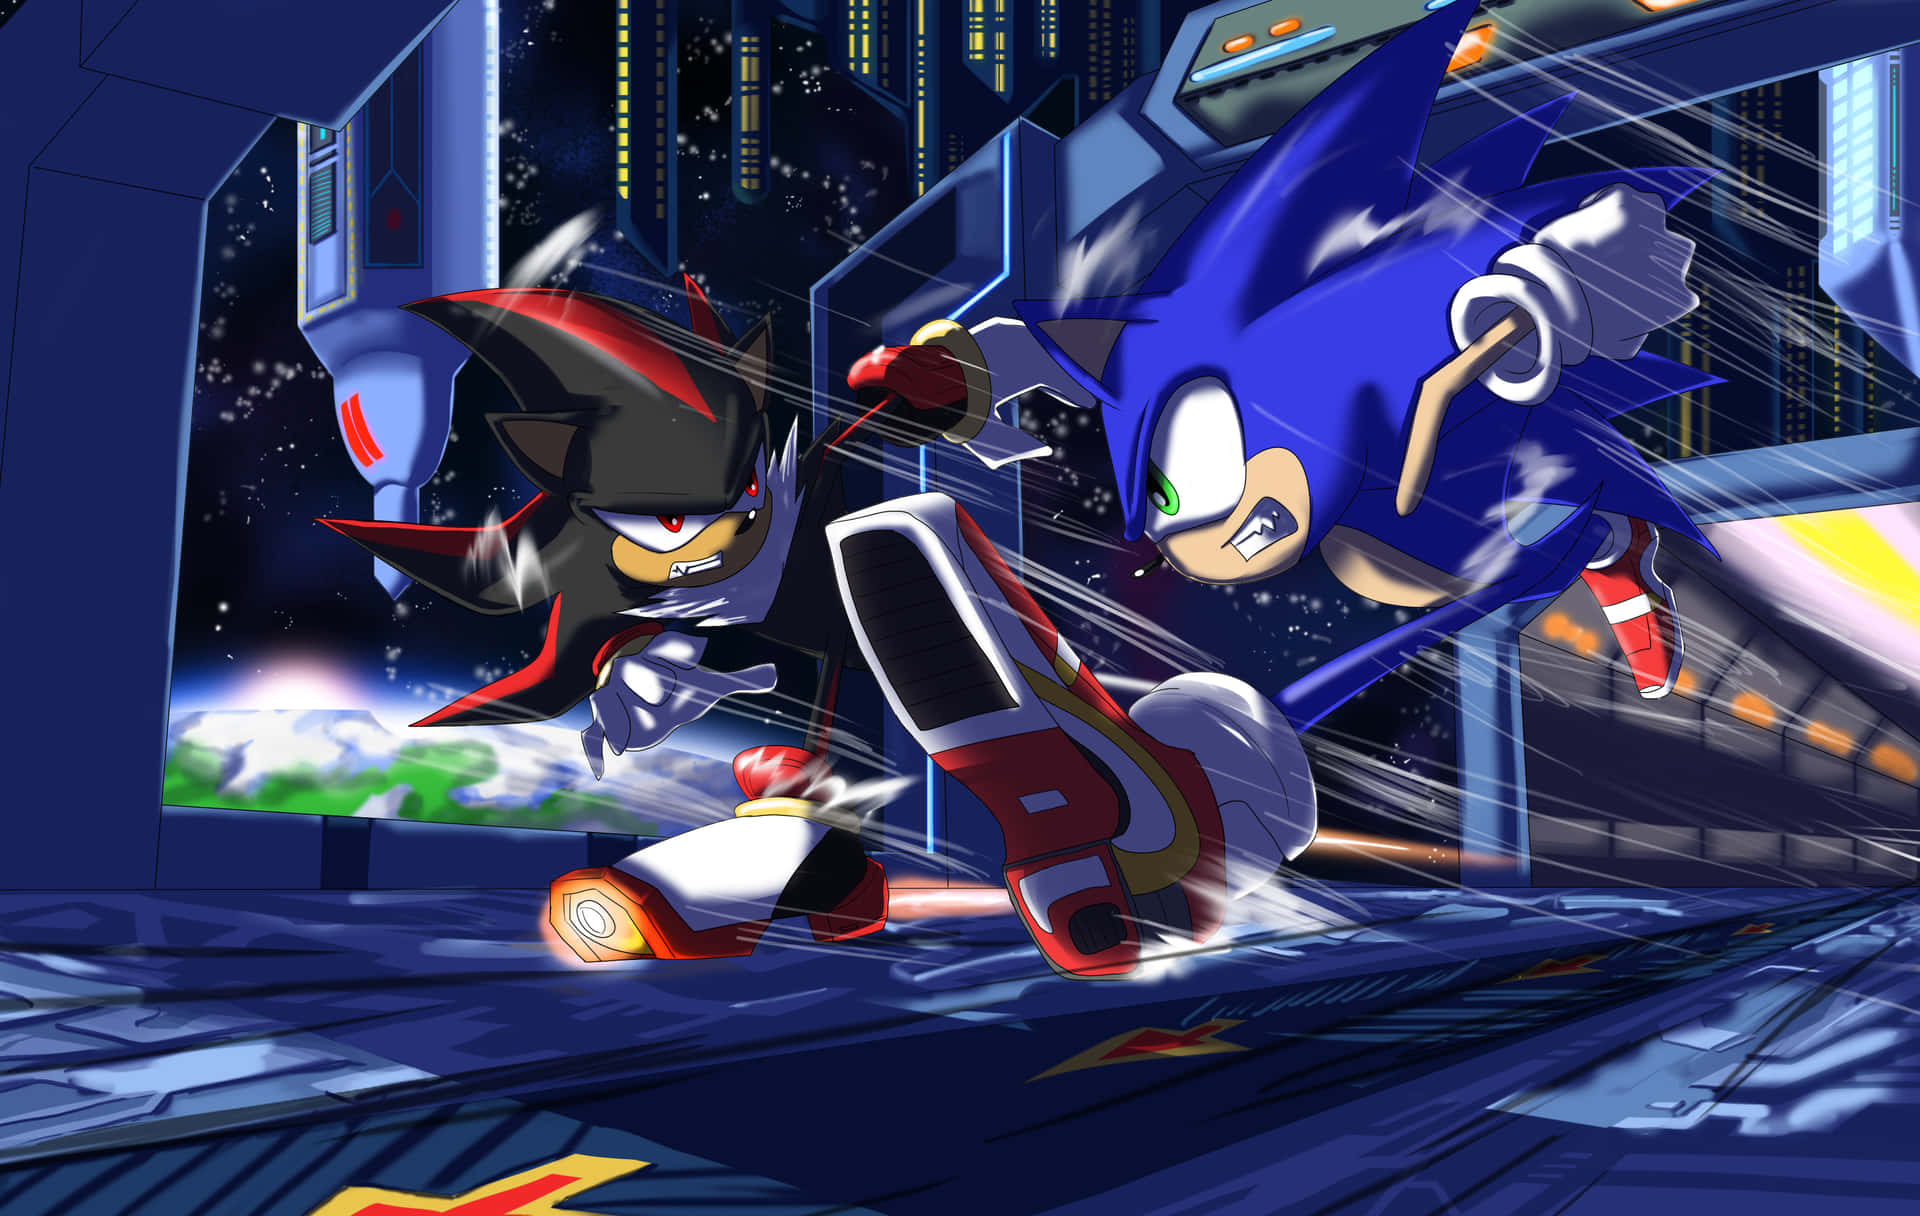 acqua scanlations — Sonic X Shadow Wallpaper Cover Story & Article